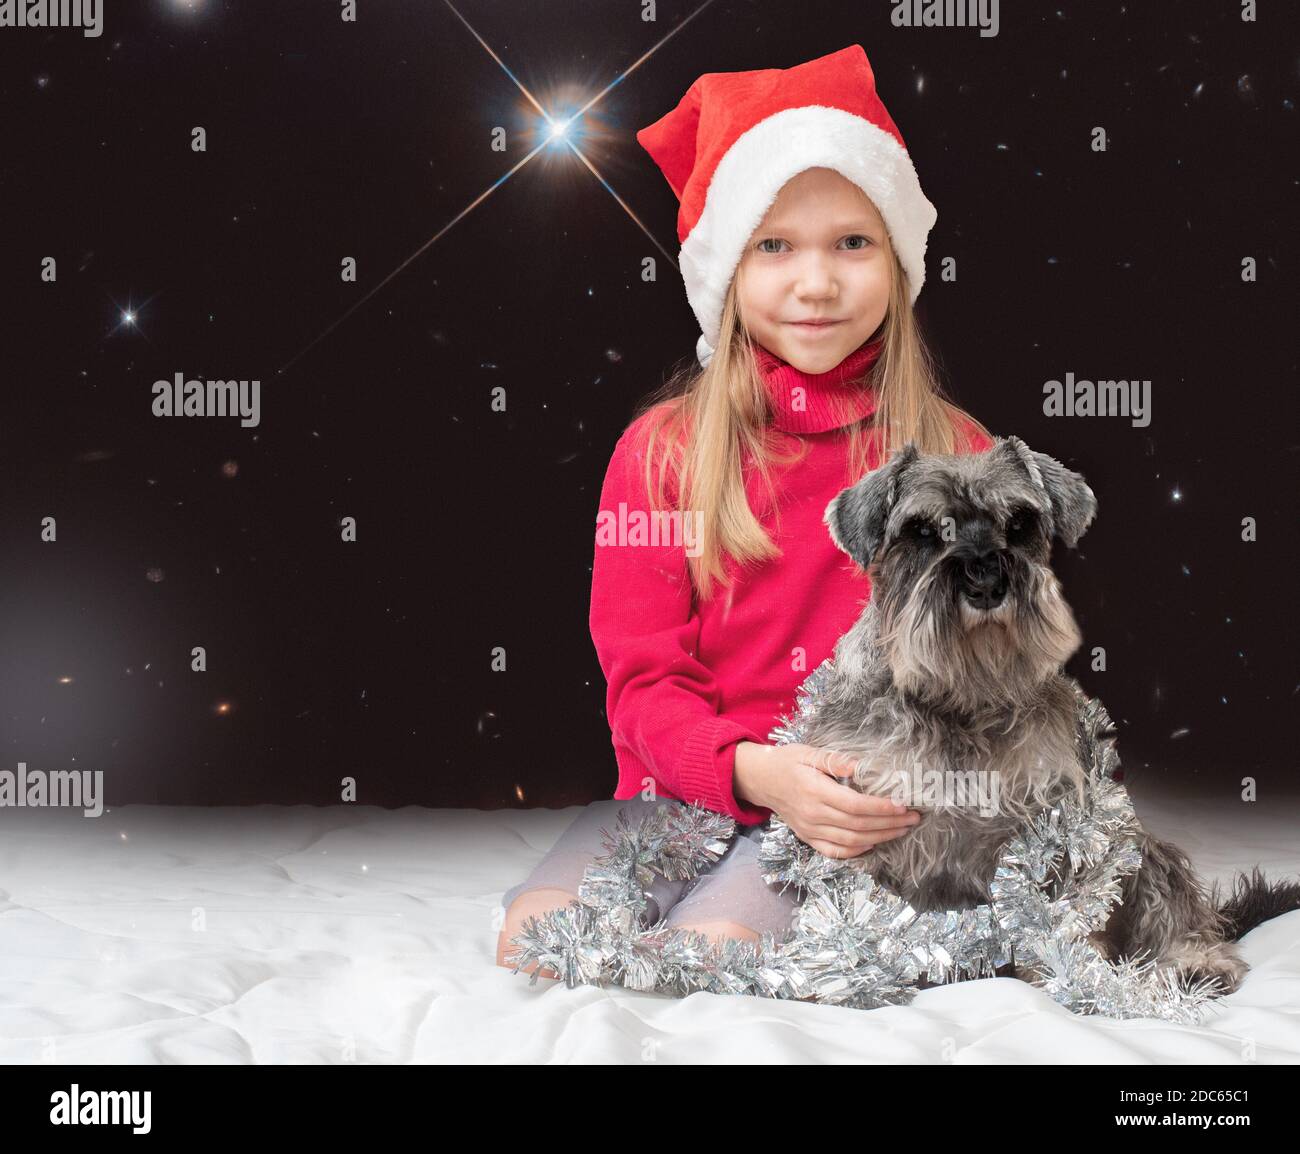 Little adorable girl in a Santa Claus hat and a miniature schnauzer dog decorated with tinsel greets Christmas against a blurry starry sky. Christmas Stock Photo